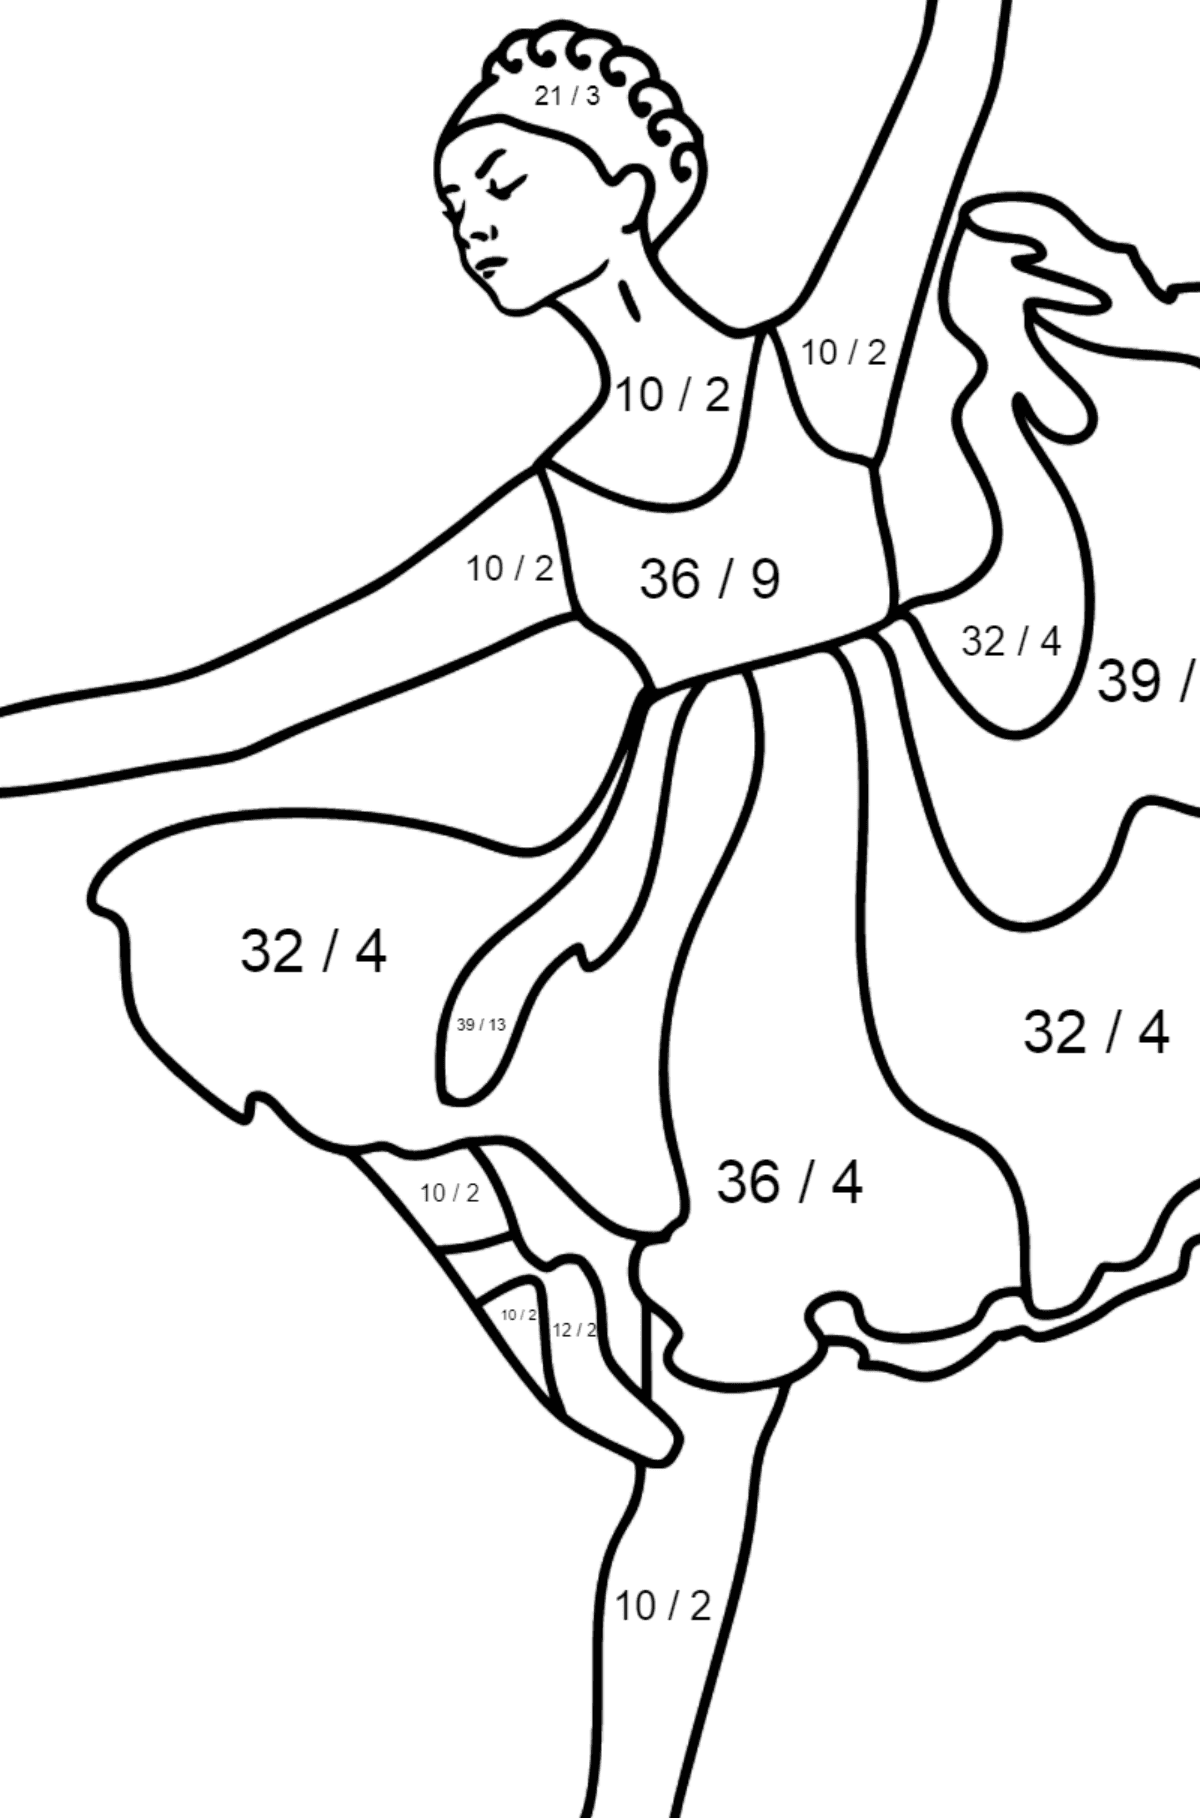 Ballerina in Lilac Dress coloring page - Math Coloring - Division for Kids